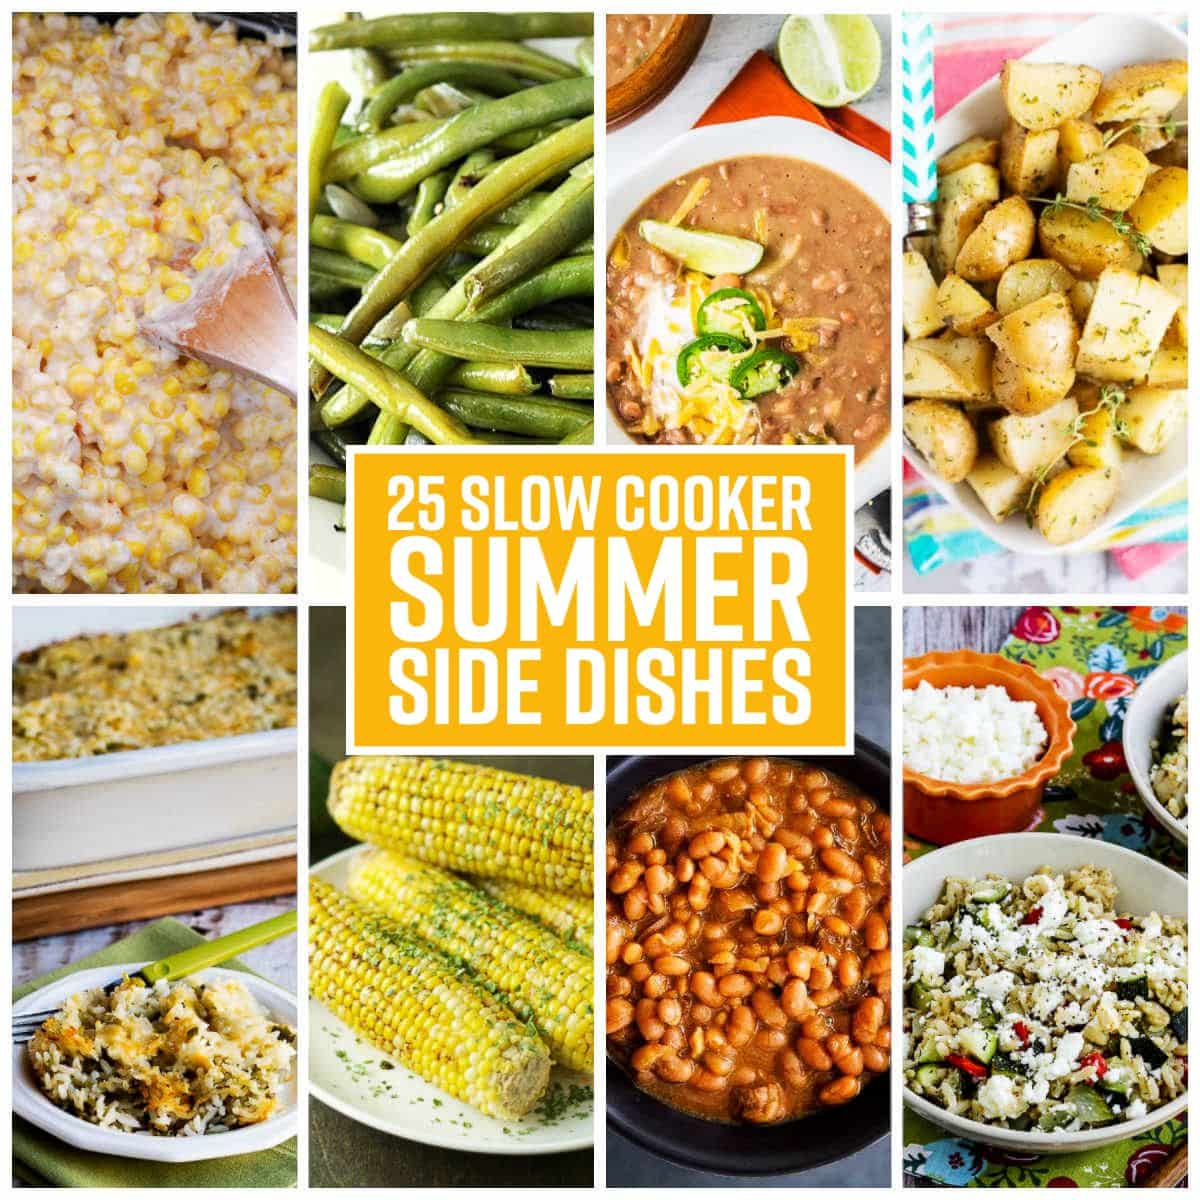 25 Slow Cooker Summer Side Dishes collage of featured recipes